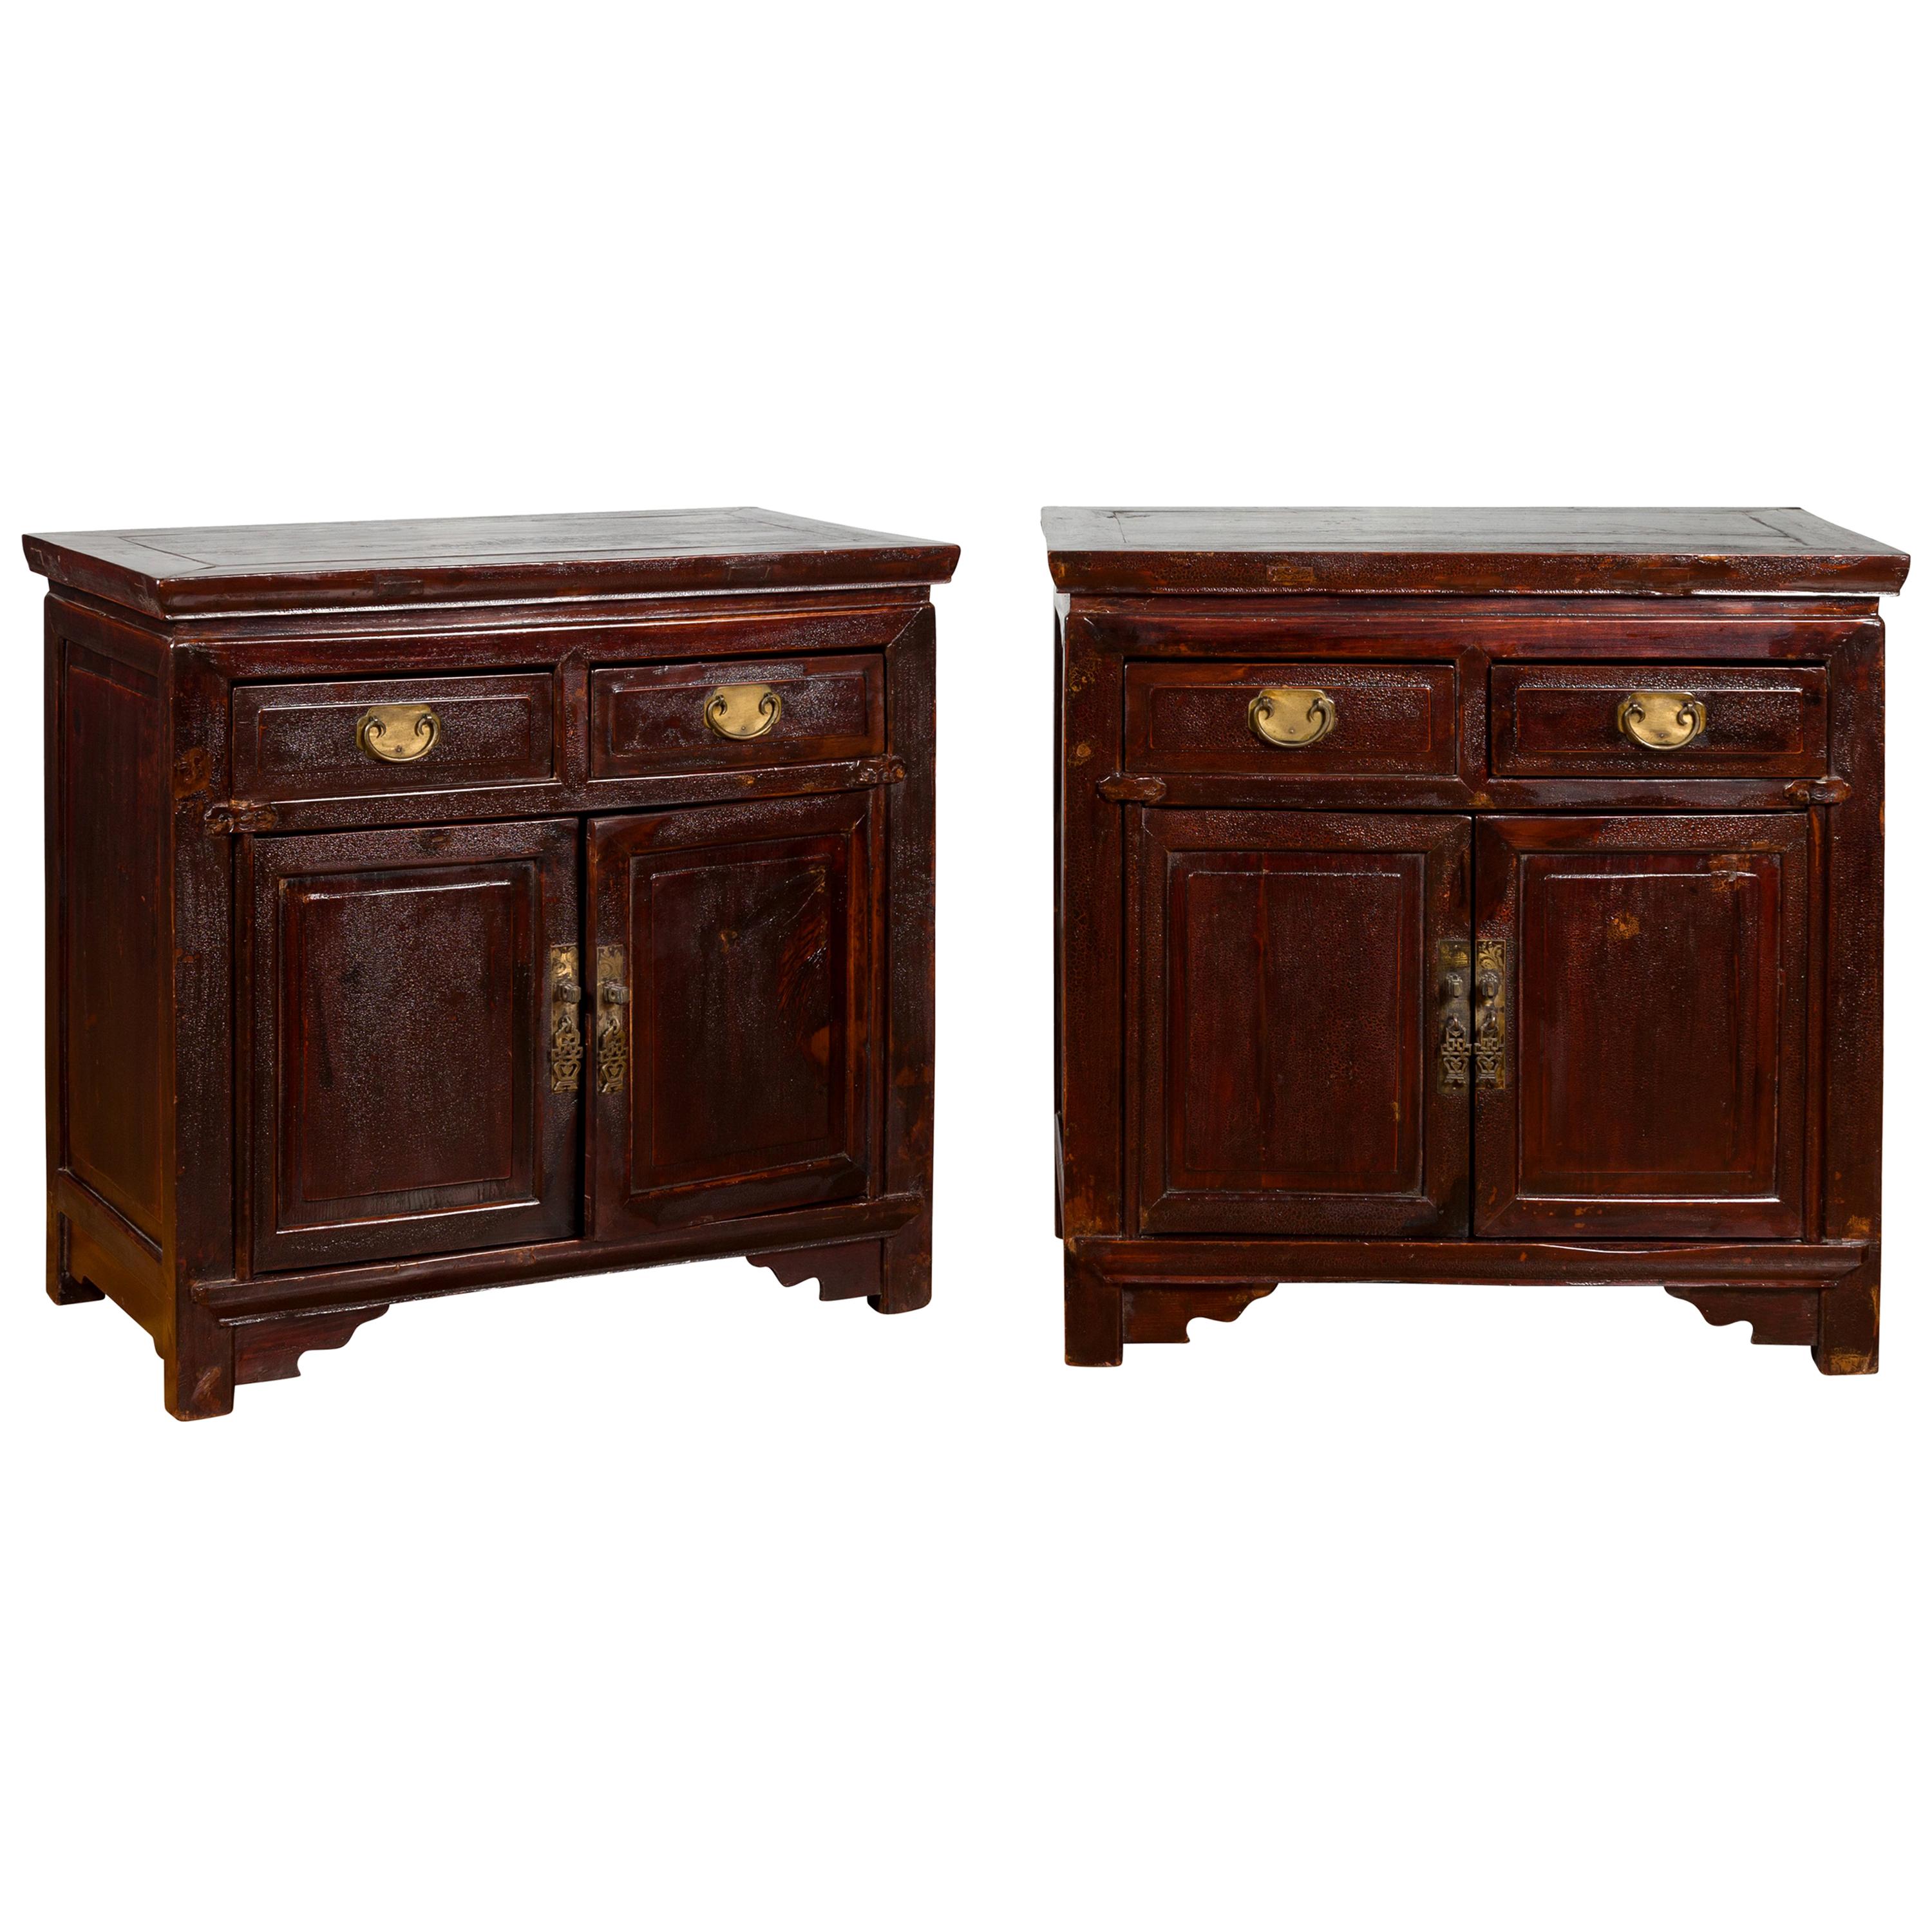 Pair of Early 20th Century Chinese Bedside Cabinets with Reddish Brown Lacquer